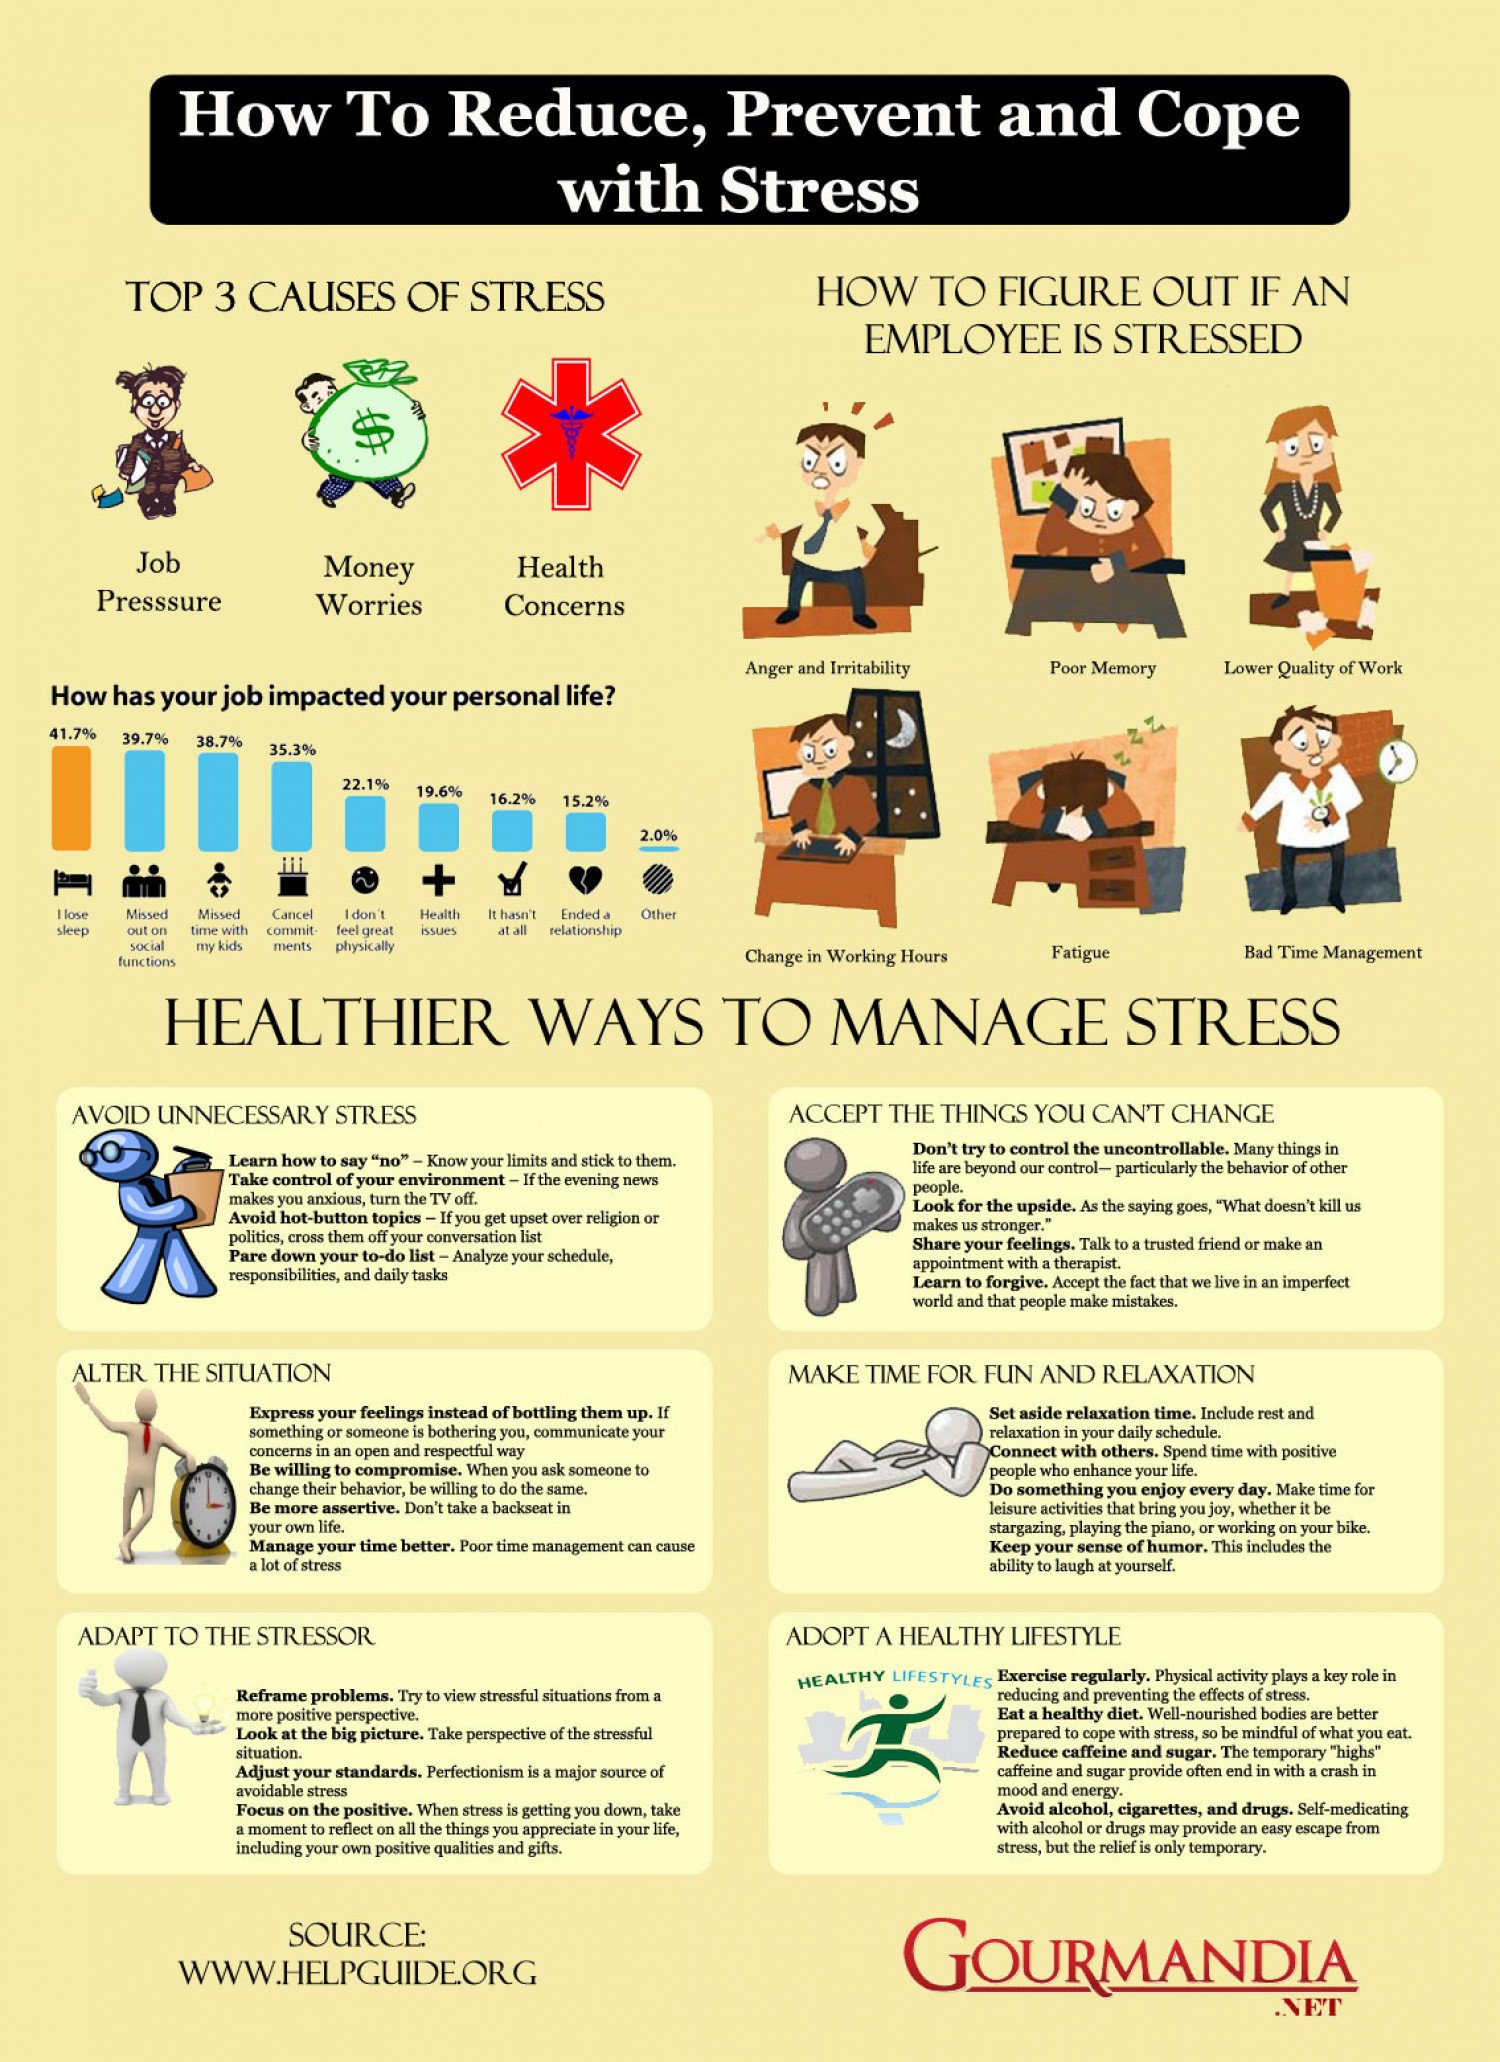 How to Reduce, Prevent and Cope with Stress